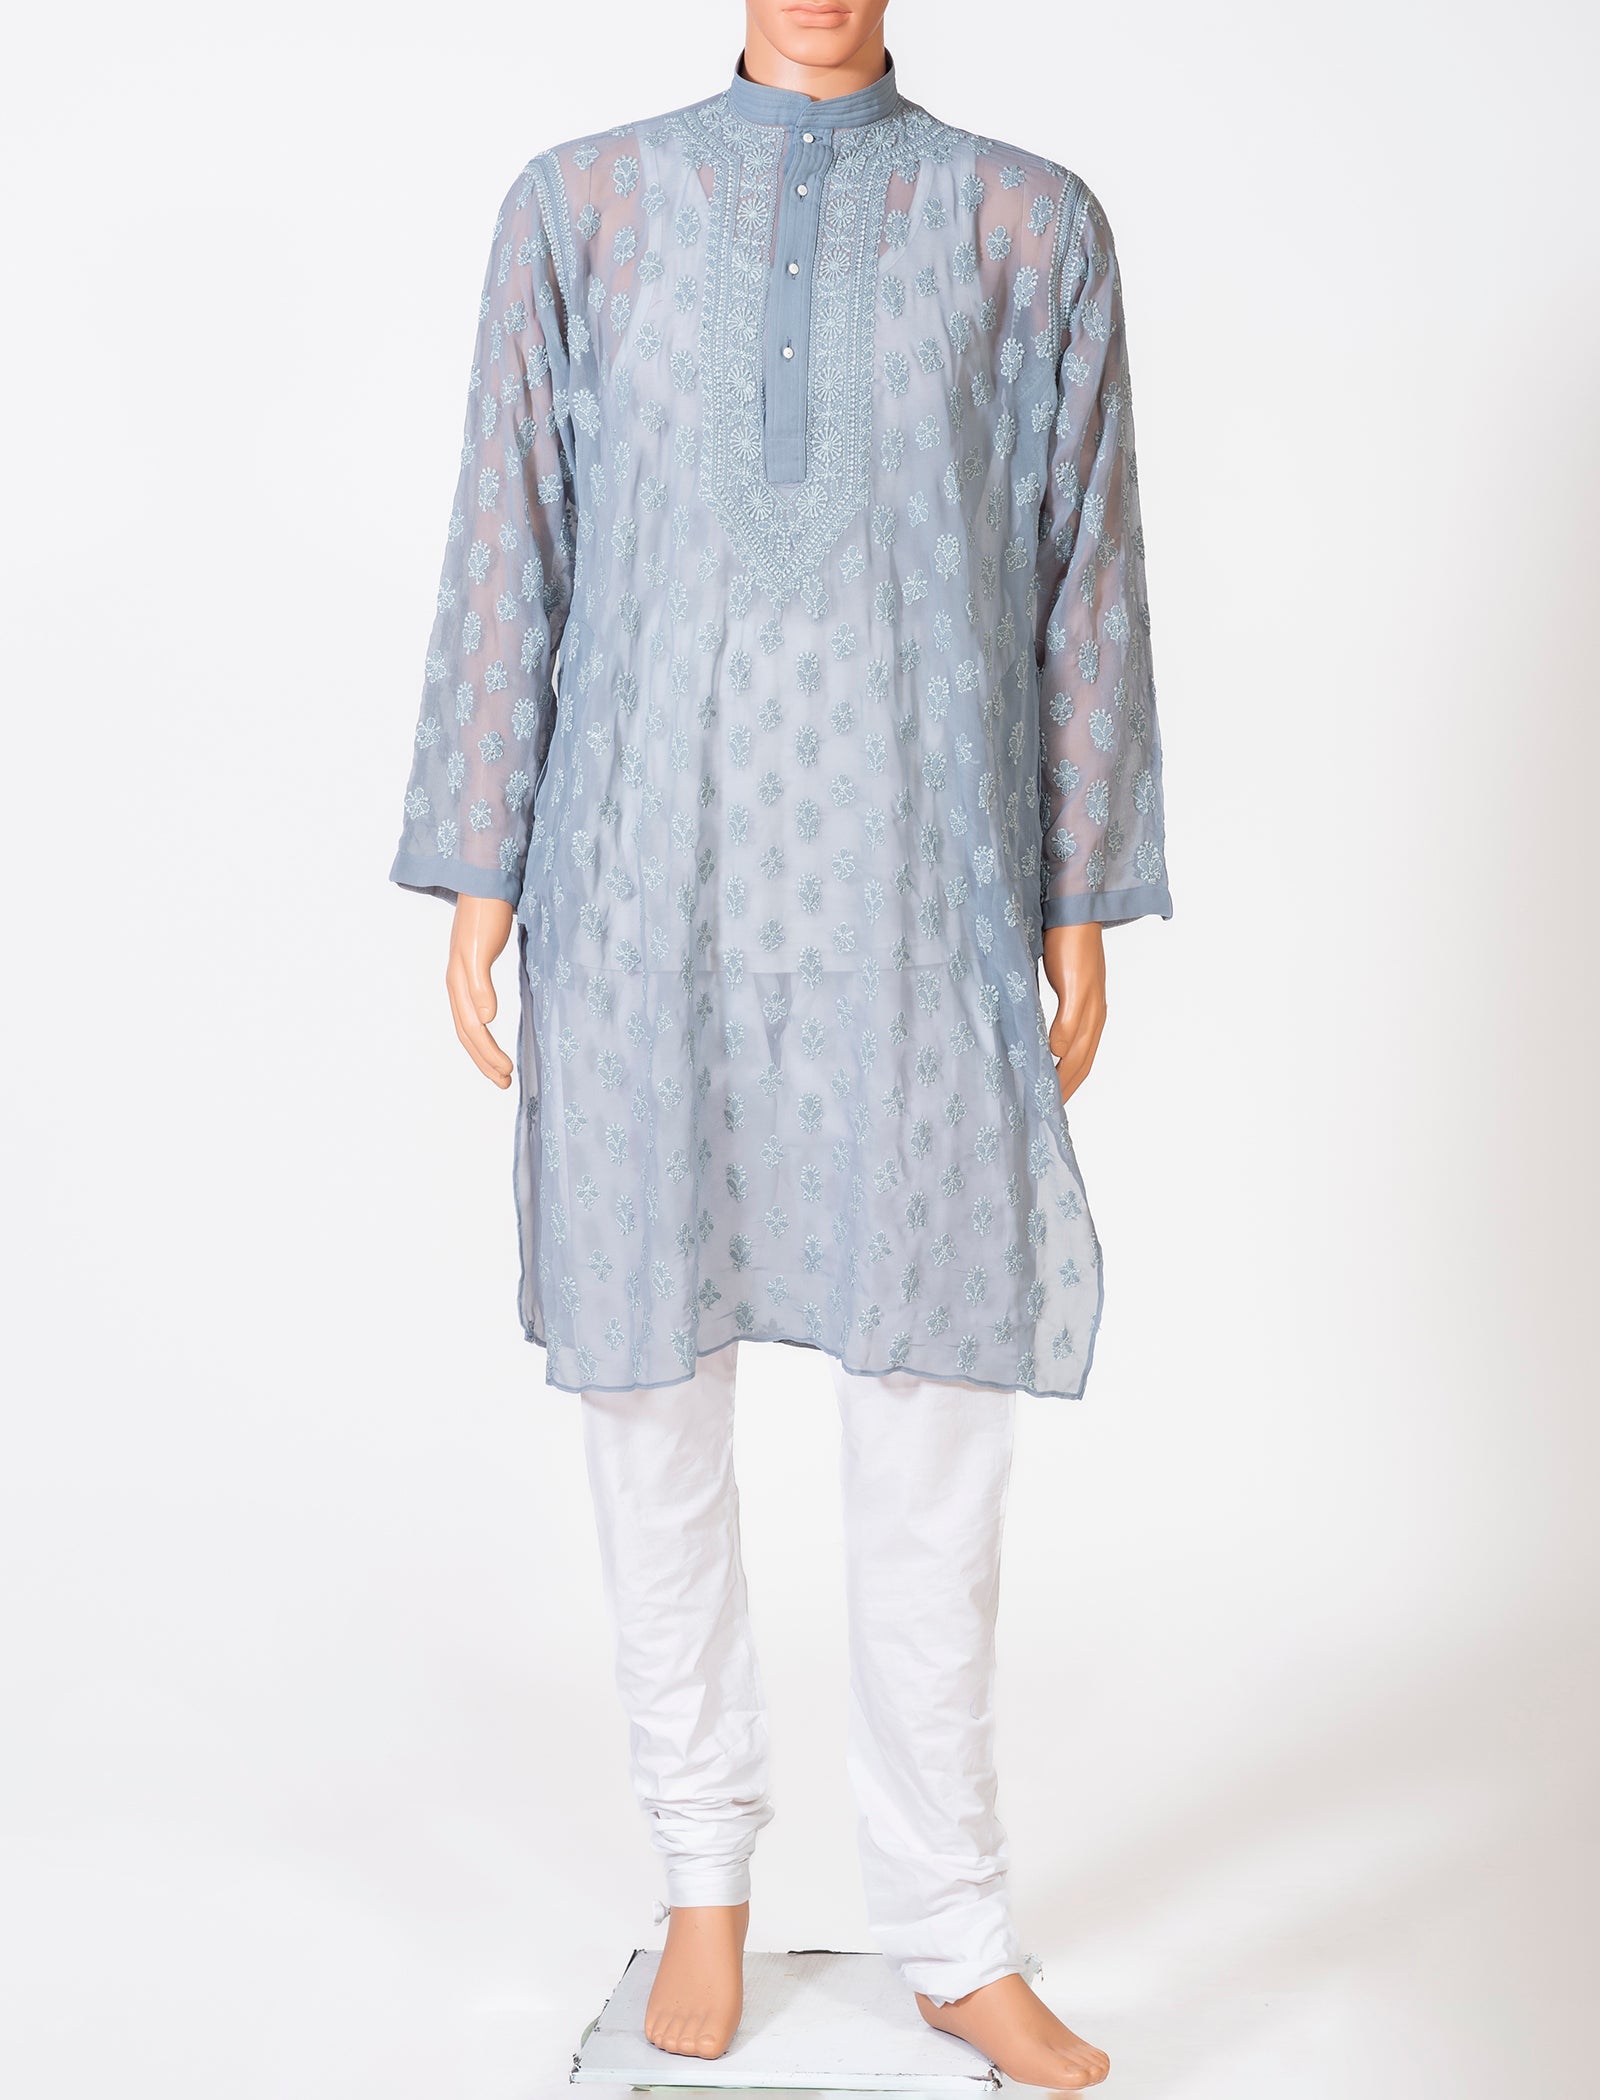 Lucknow Chikan Emporium Georgette Grey Colour Gents Kurta With Self Stripes And Fancy Hand Chikankari On Neck.